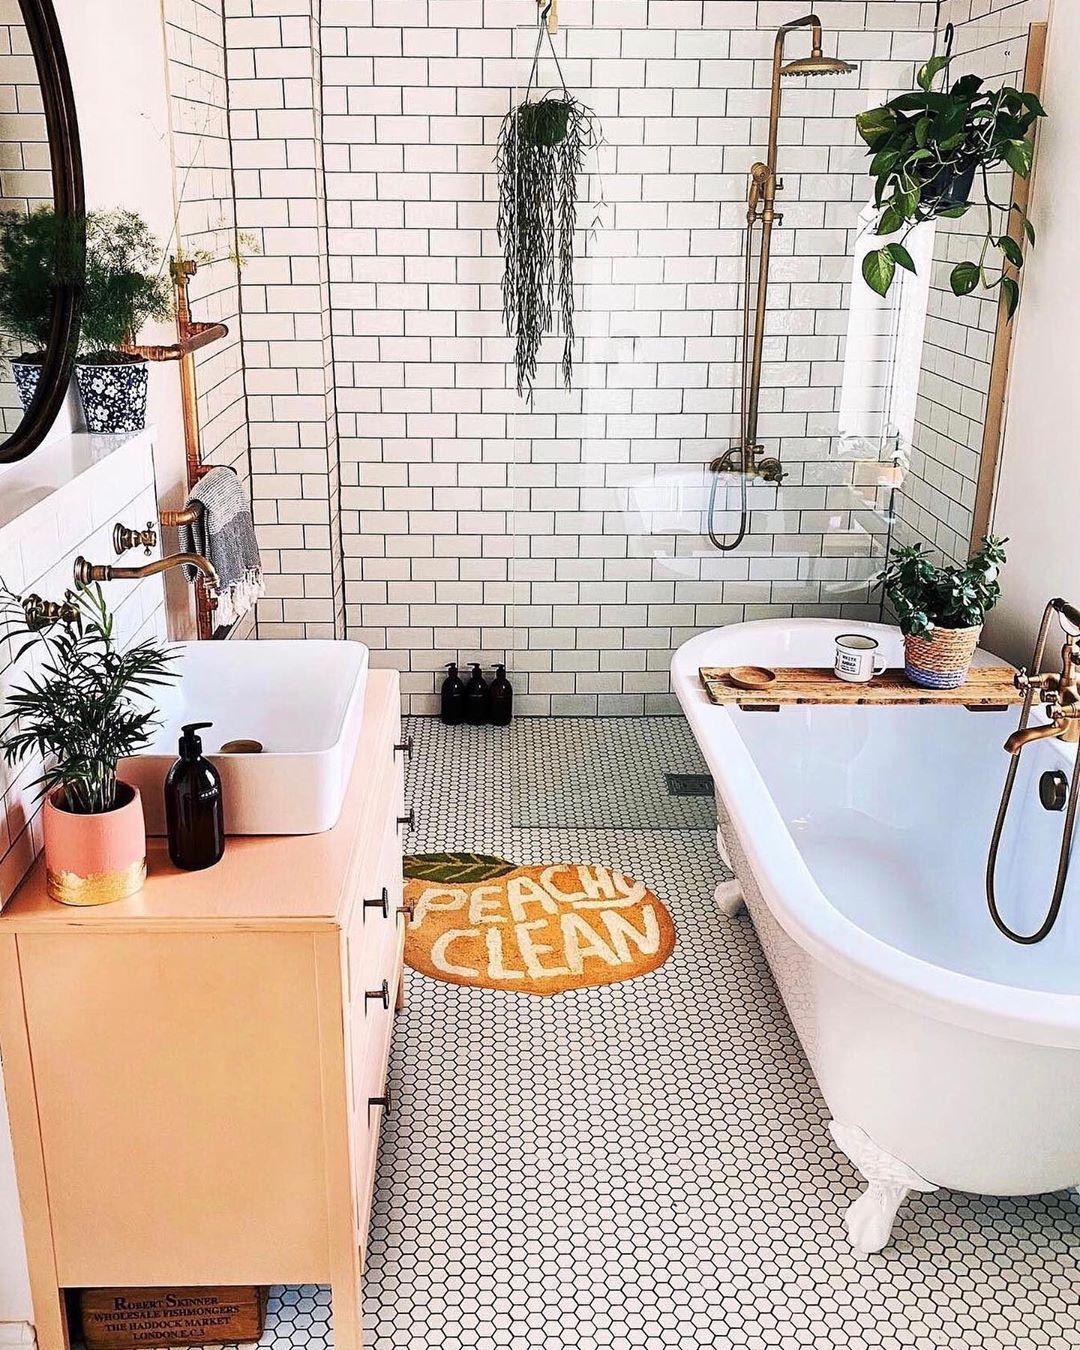 Urban Outfitters (@urbanoutfitters) posted on Instagram: “The bath mat really brings the room together, if you ask us. @homebythestation #UOHome” • May 1, 2020 at 7:00pm UTC - Urban Outfitters (@urbanoutfitters) posted on Instagram: “The bath mat really brings the room together, if you ask us. @homebythestation #UOHome” • May 1, 2020 at 7:00pm UTC -   18 style Urban deco ideas